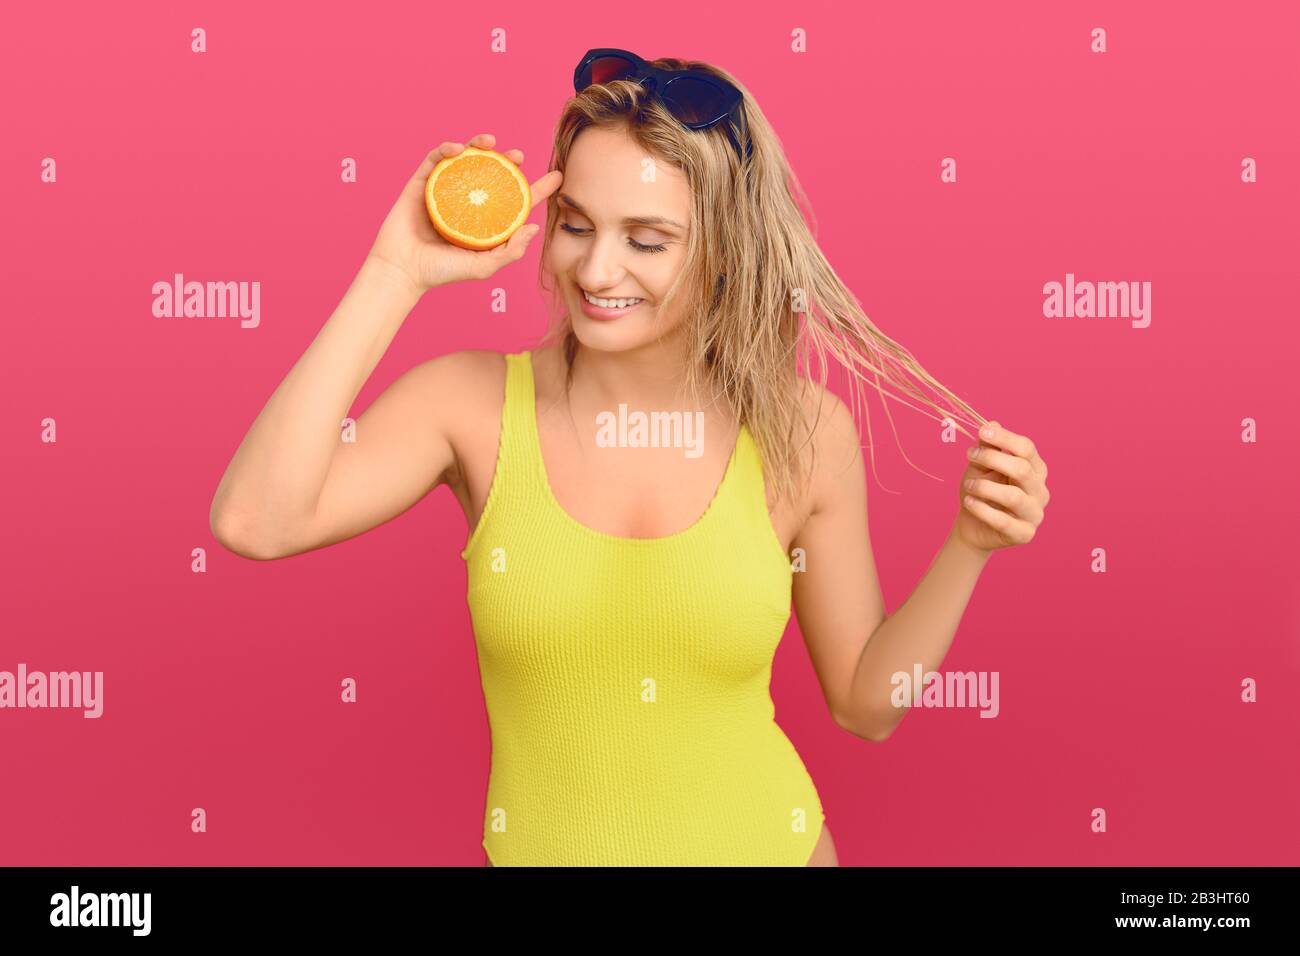 Happy healthy young woman holding a halved fresh juicy orange to her eye with a beaming friendly smile over a pink studio background Stock Photo